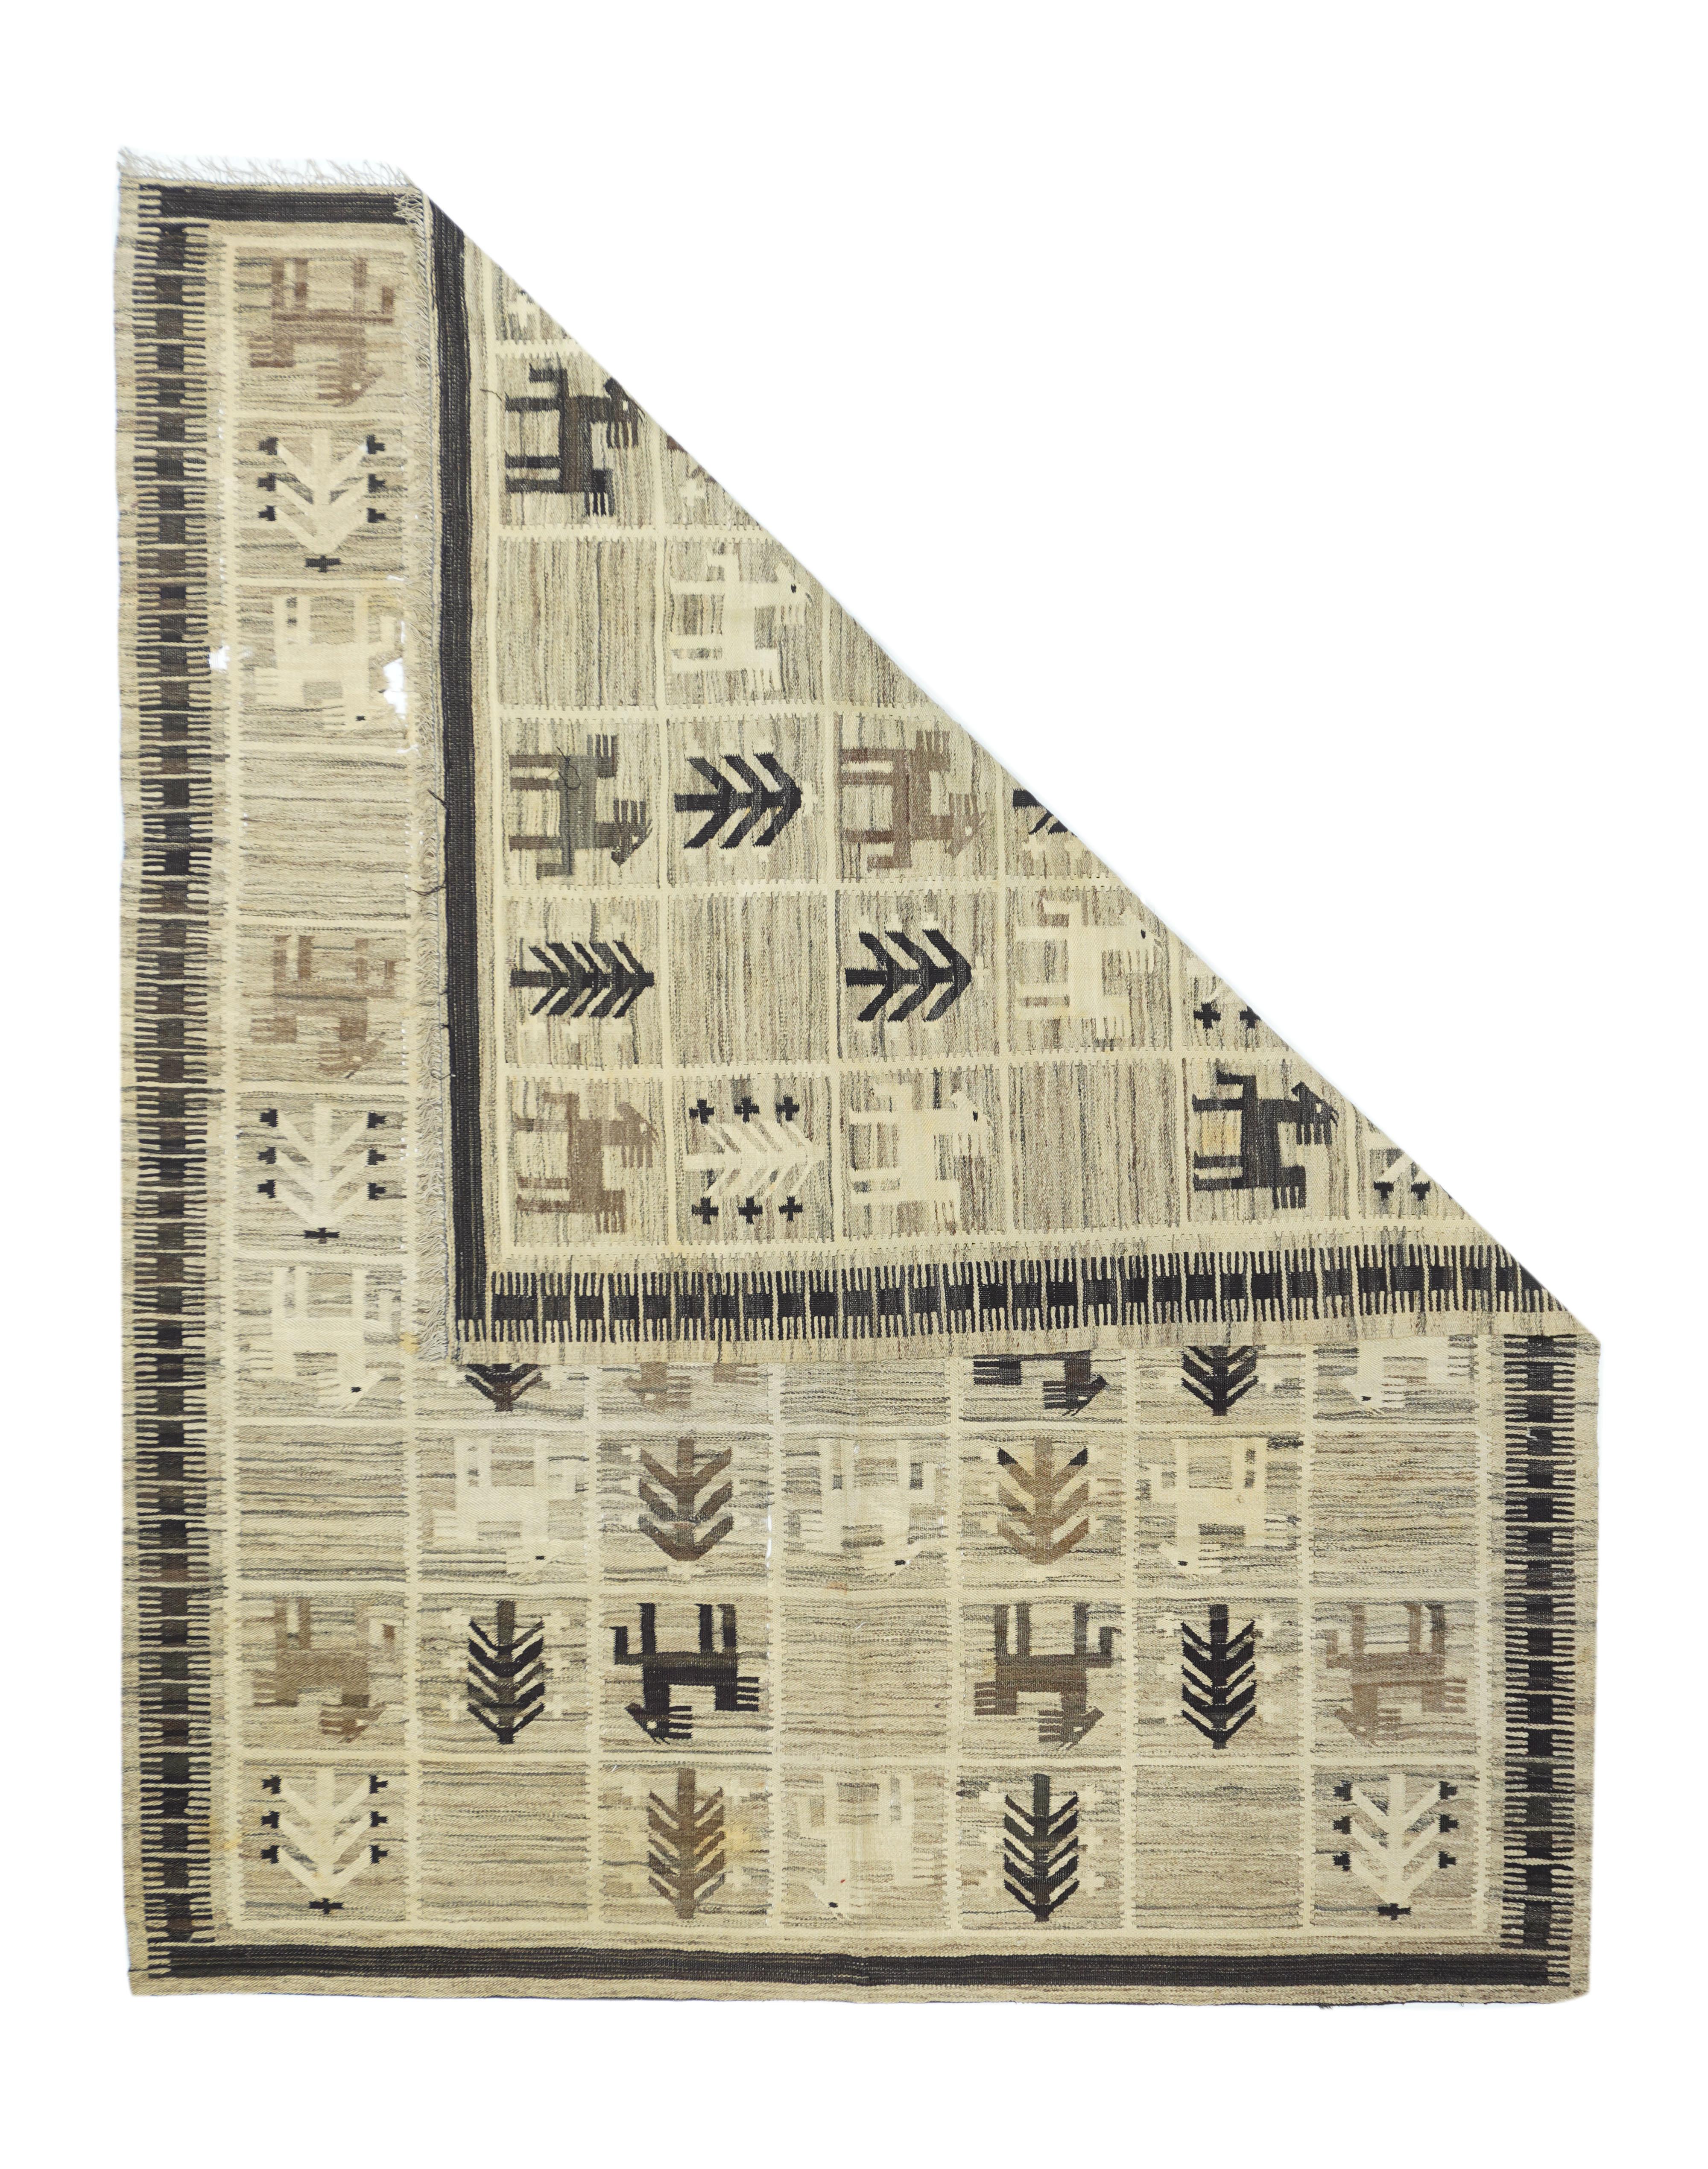 Antique Turkish Kilim Rug 5'7'' x 6'10''. A naturally abrashed light brown field is divided into a seven by ten compartment pattern, with quadrupeds and simple herringbone trees occupying most of the panel. Main border of dark brown square double